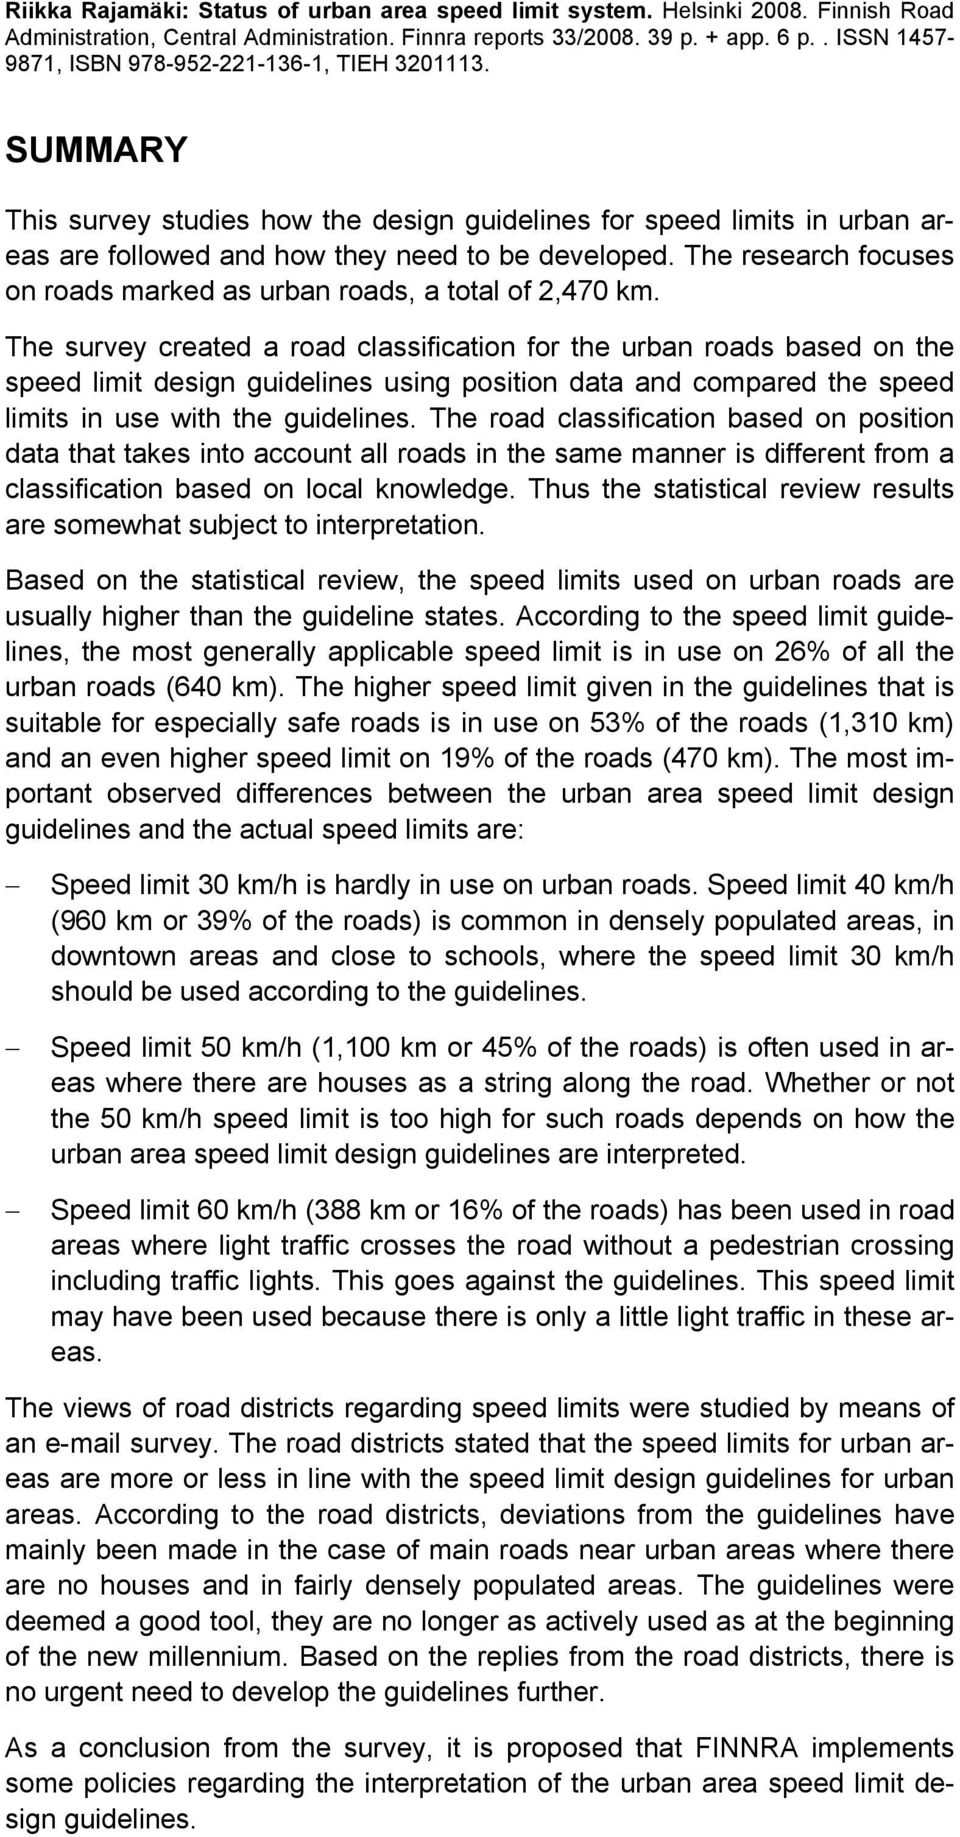 The research focuses on roads marked as urban roads, a total of 2,470 km.